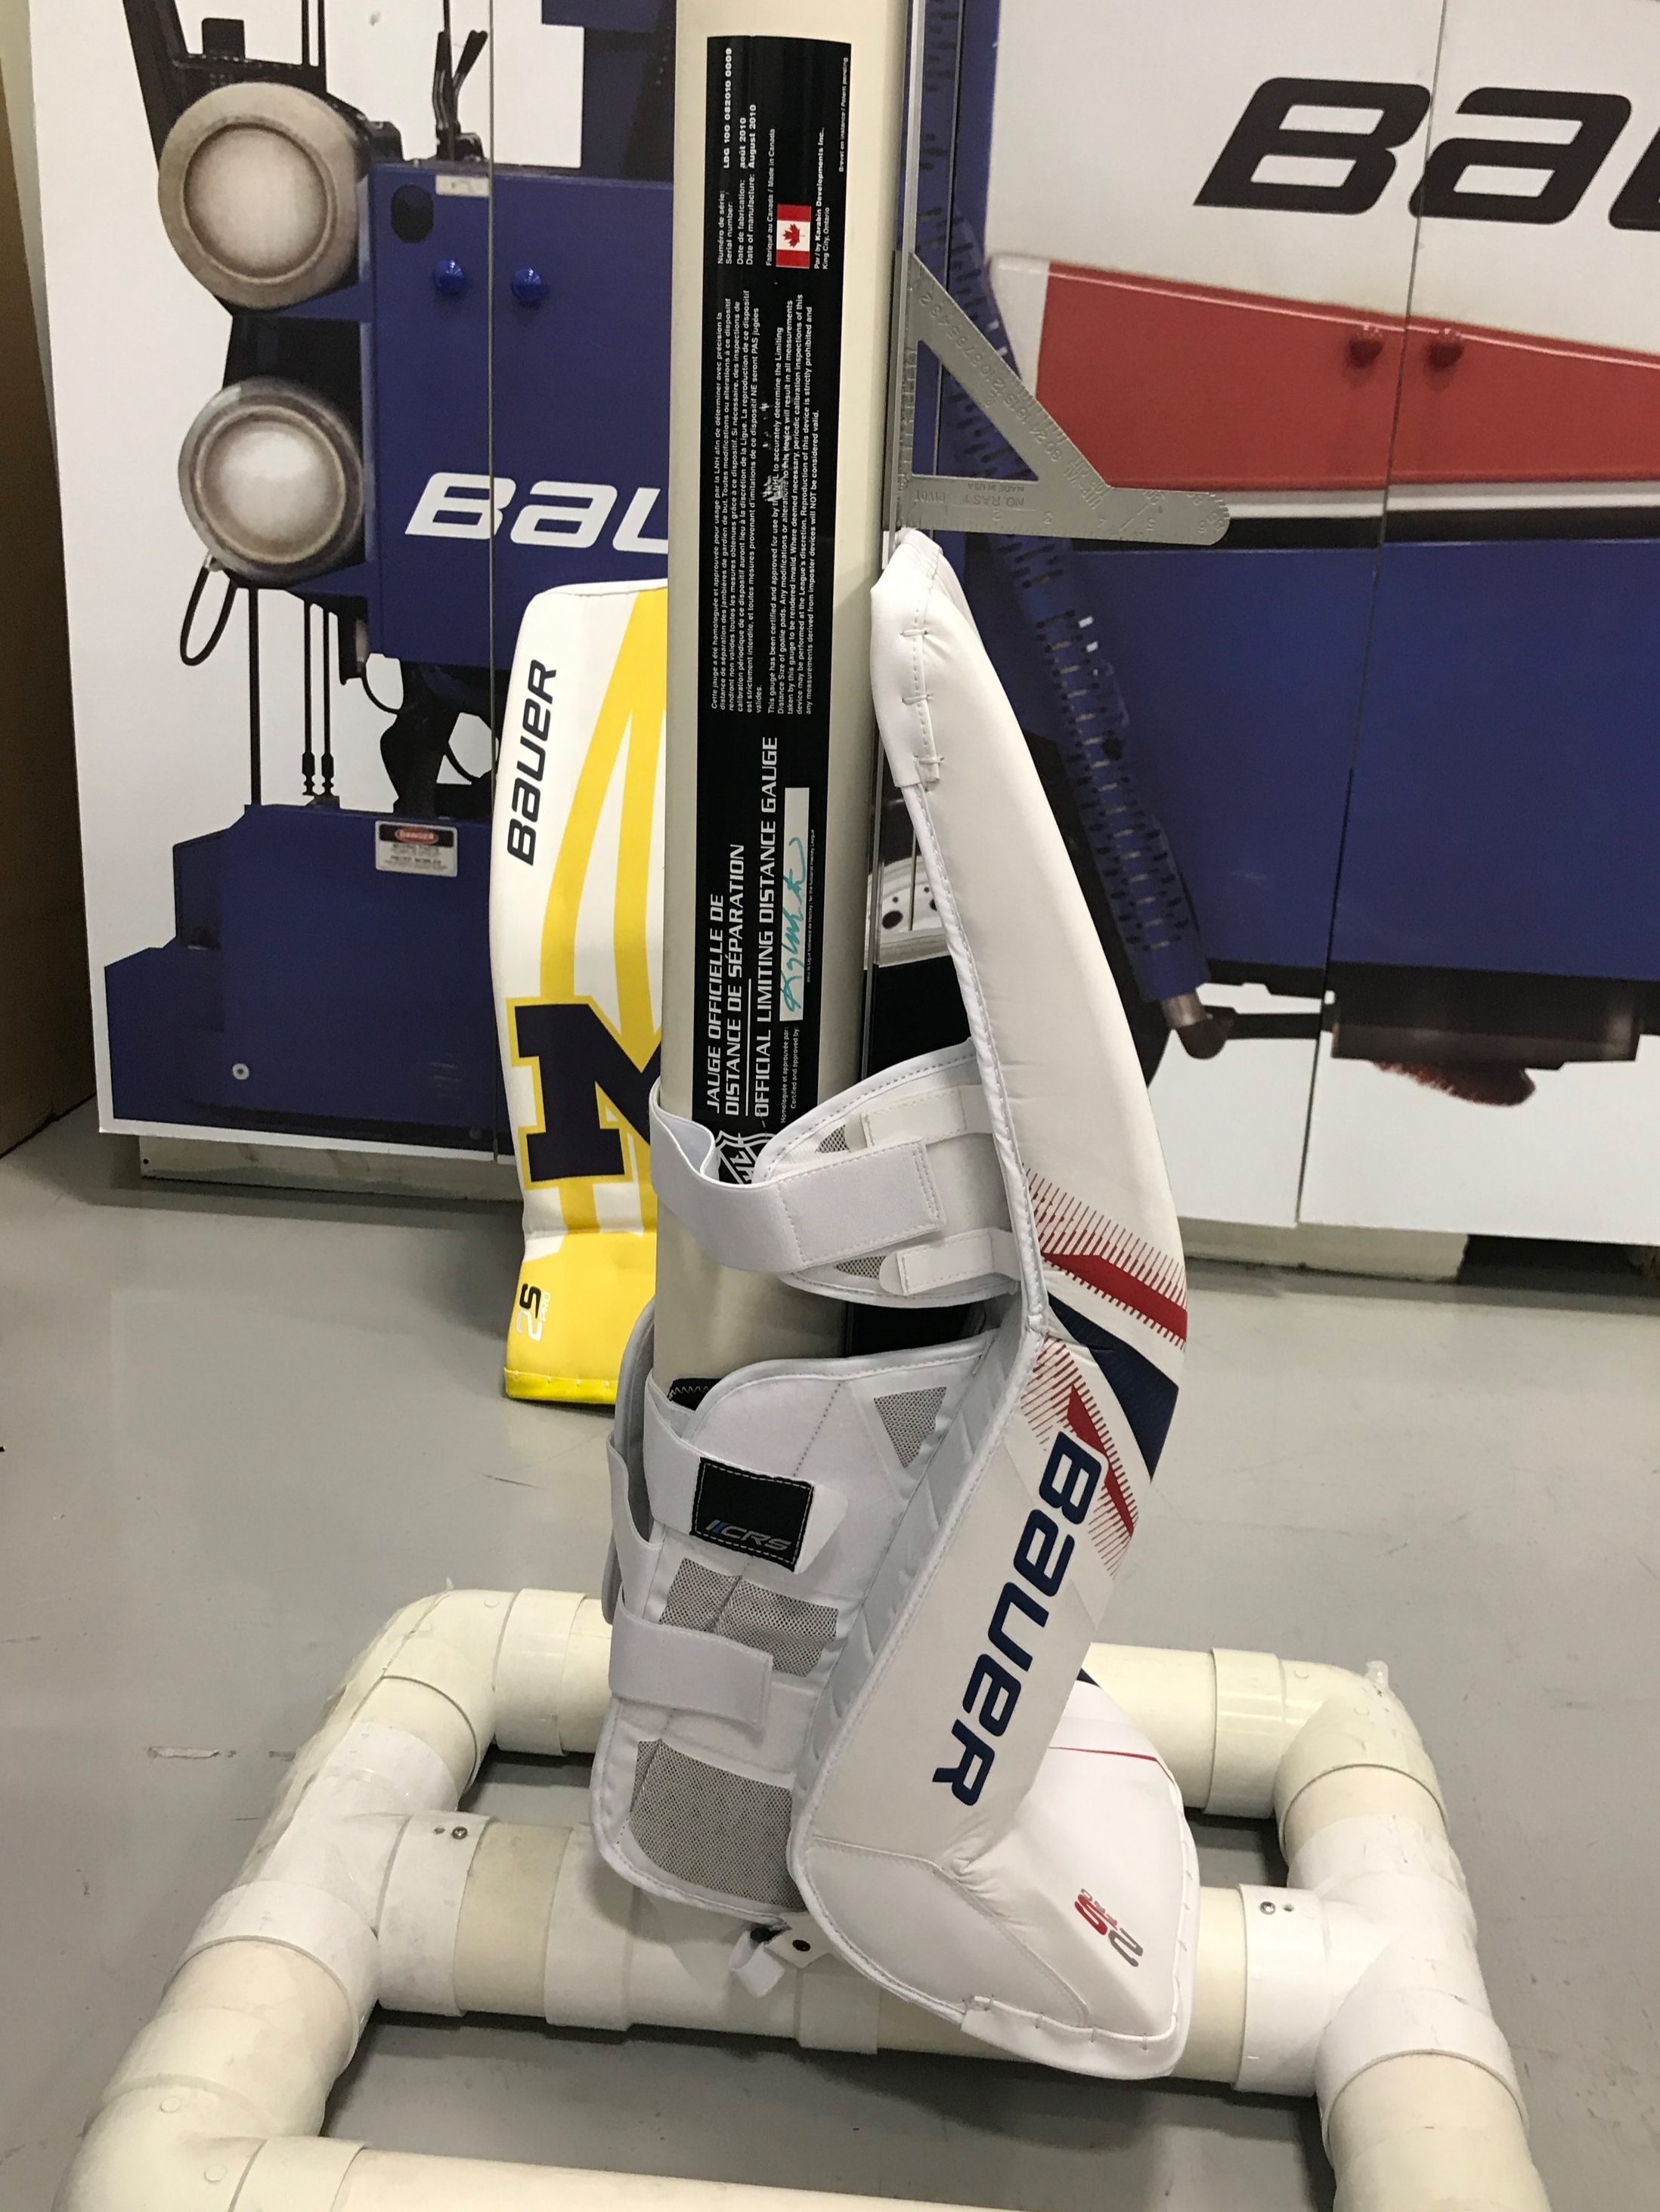 The evolution of the goalie pad rules - The Boston Globe